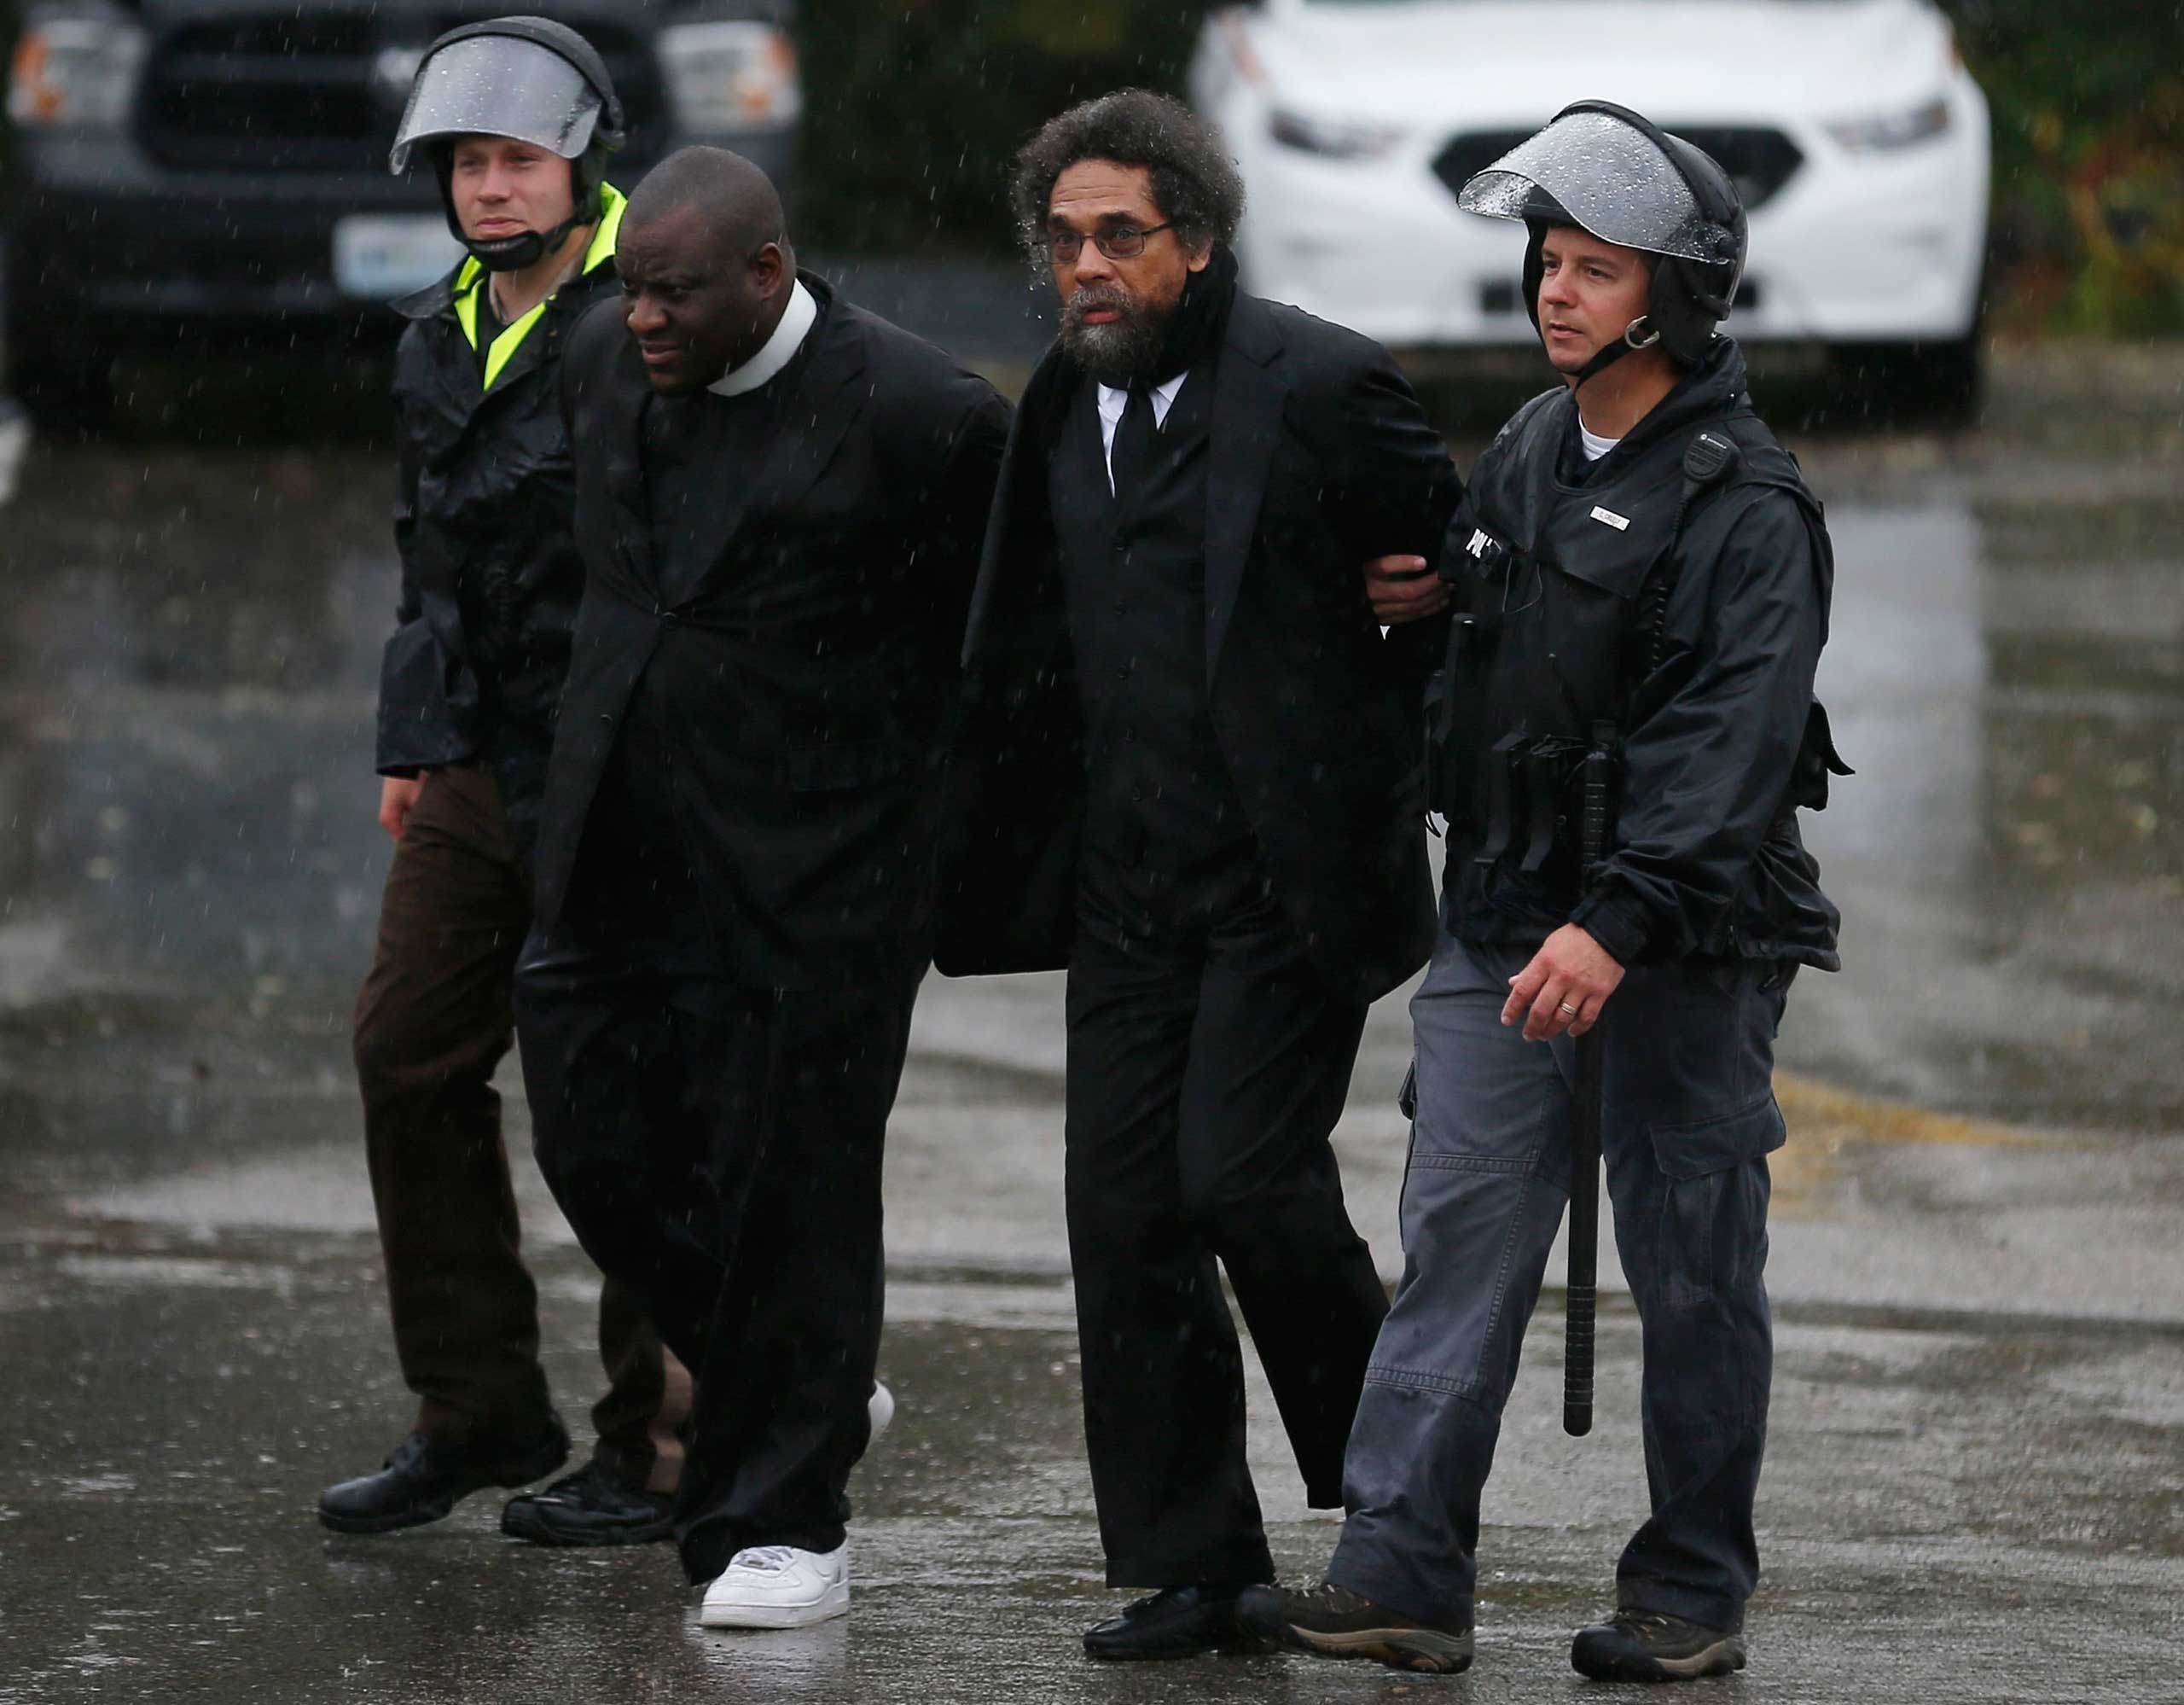 Activist Cornel West (2nd R) is detained by police during a protest at the Ferguson Police Department in Ferguson, Missouri, October 13, 2014. (Jim Young&mdash;Reuters)